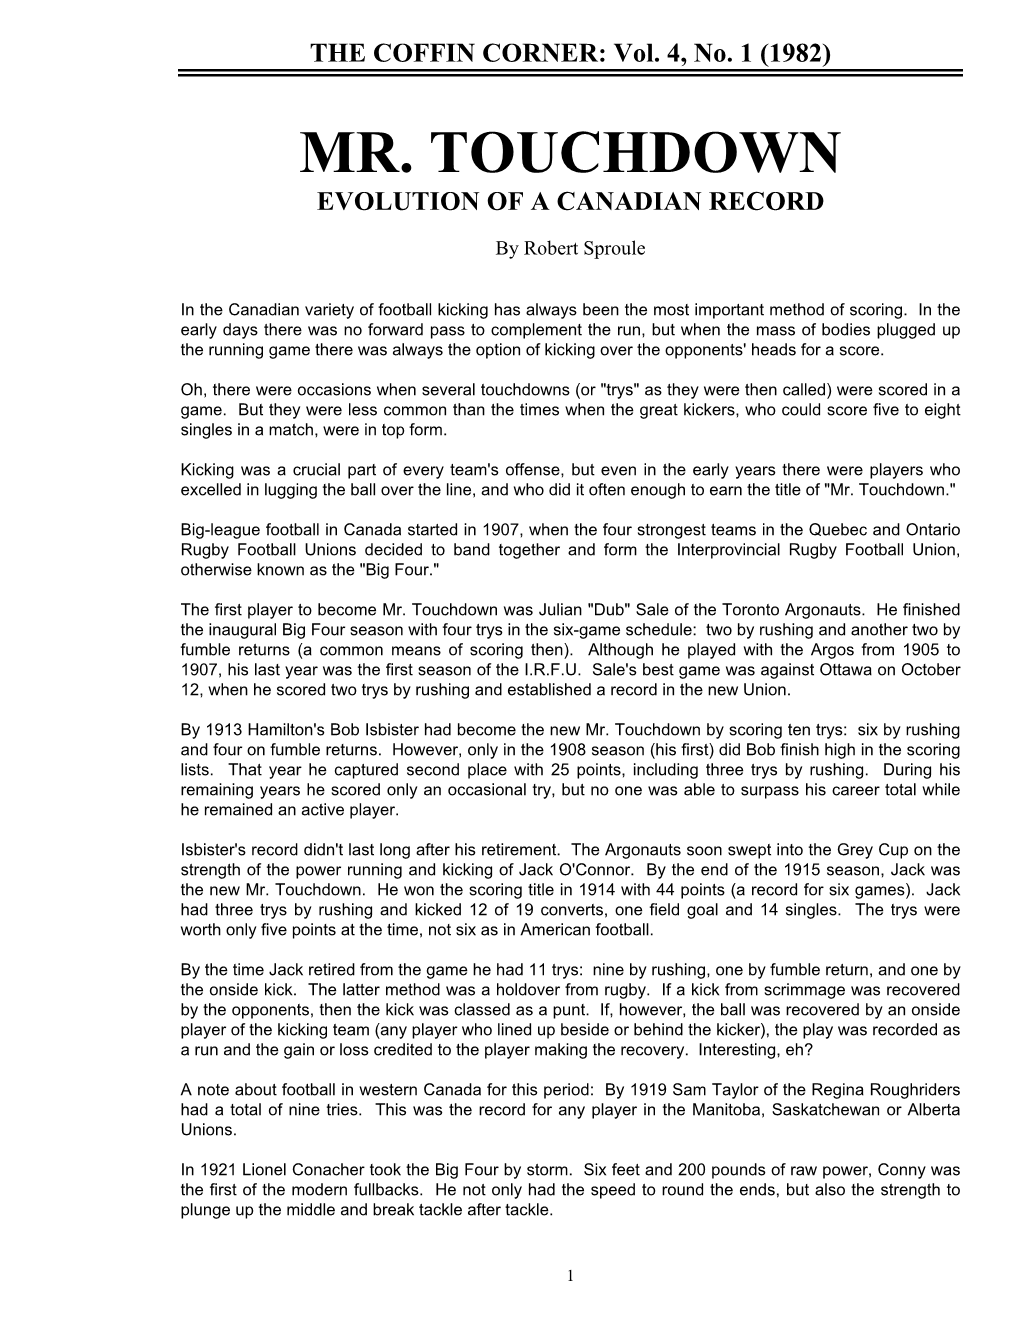 Mr. Touchdown Evolution of a Canadian Record